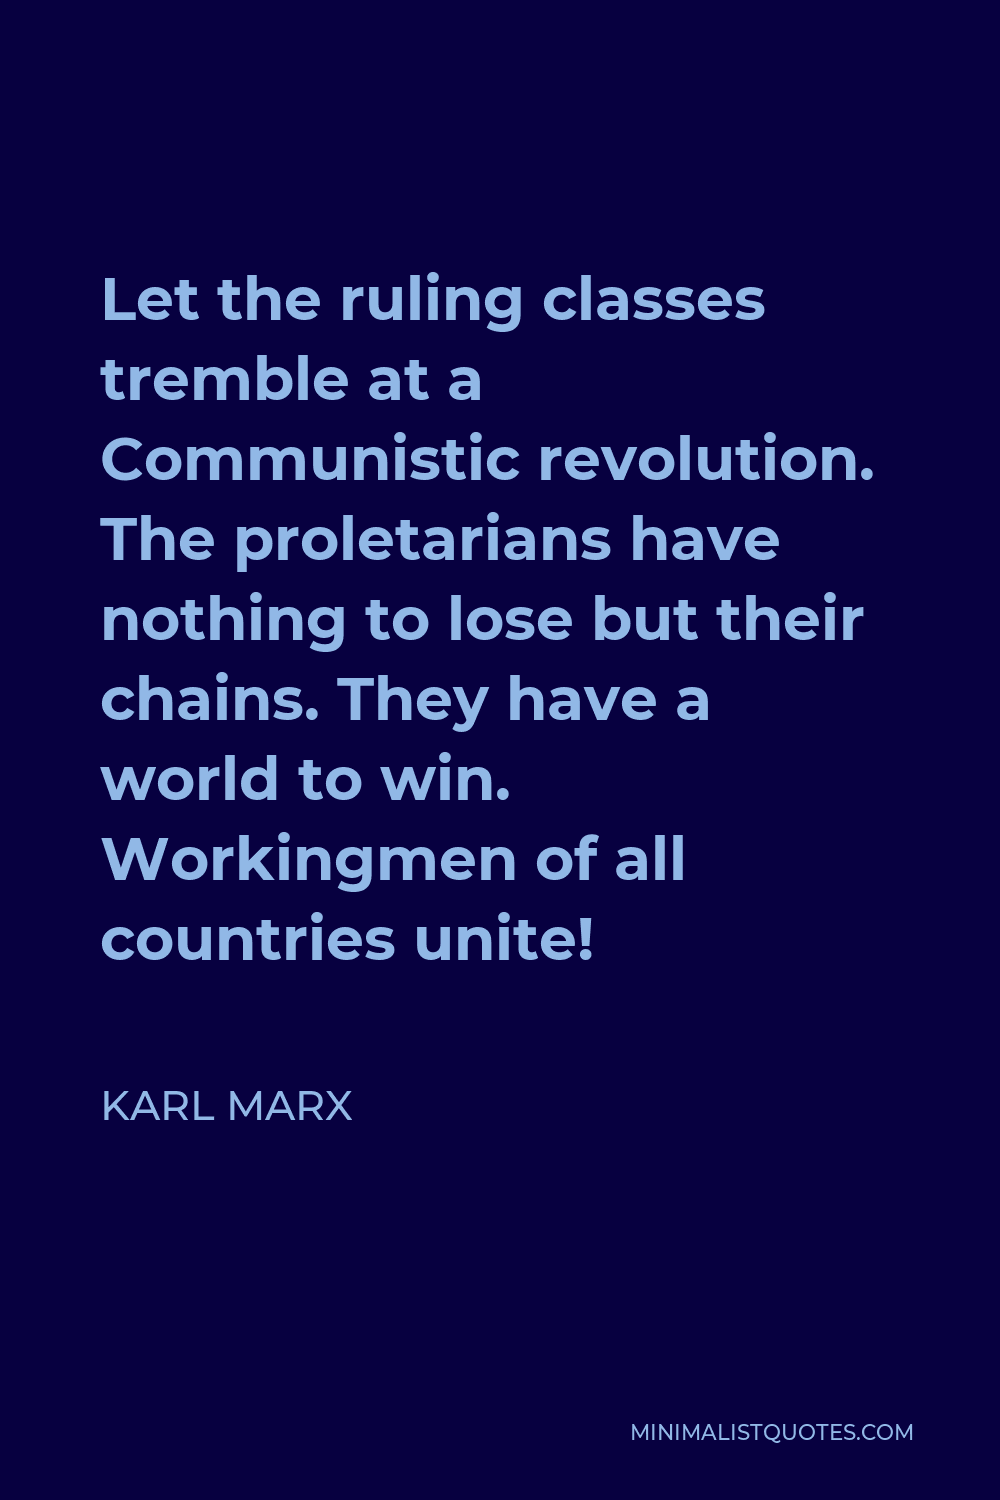 Karl Marx Quote - Let the ruling classes tremble at a Communistic revolution. The proletarians have nothing to lose but their chains. They have a world to win. Workingmen of all countries unite!